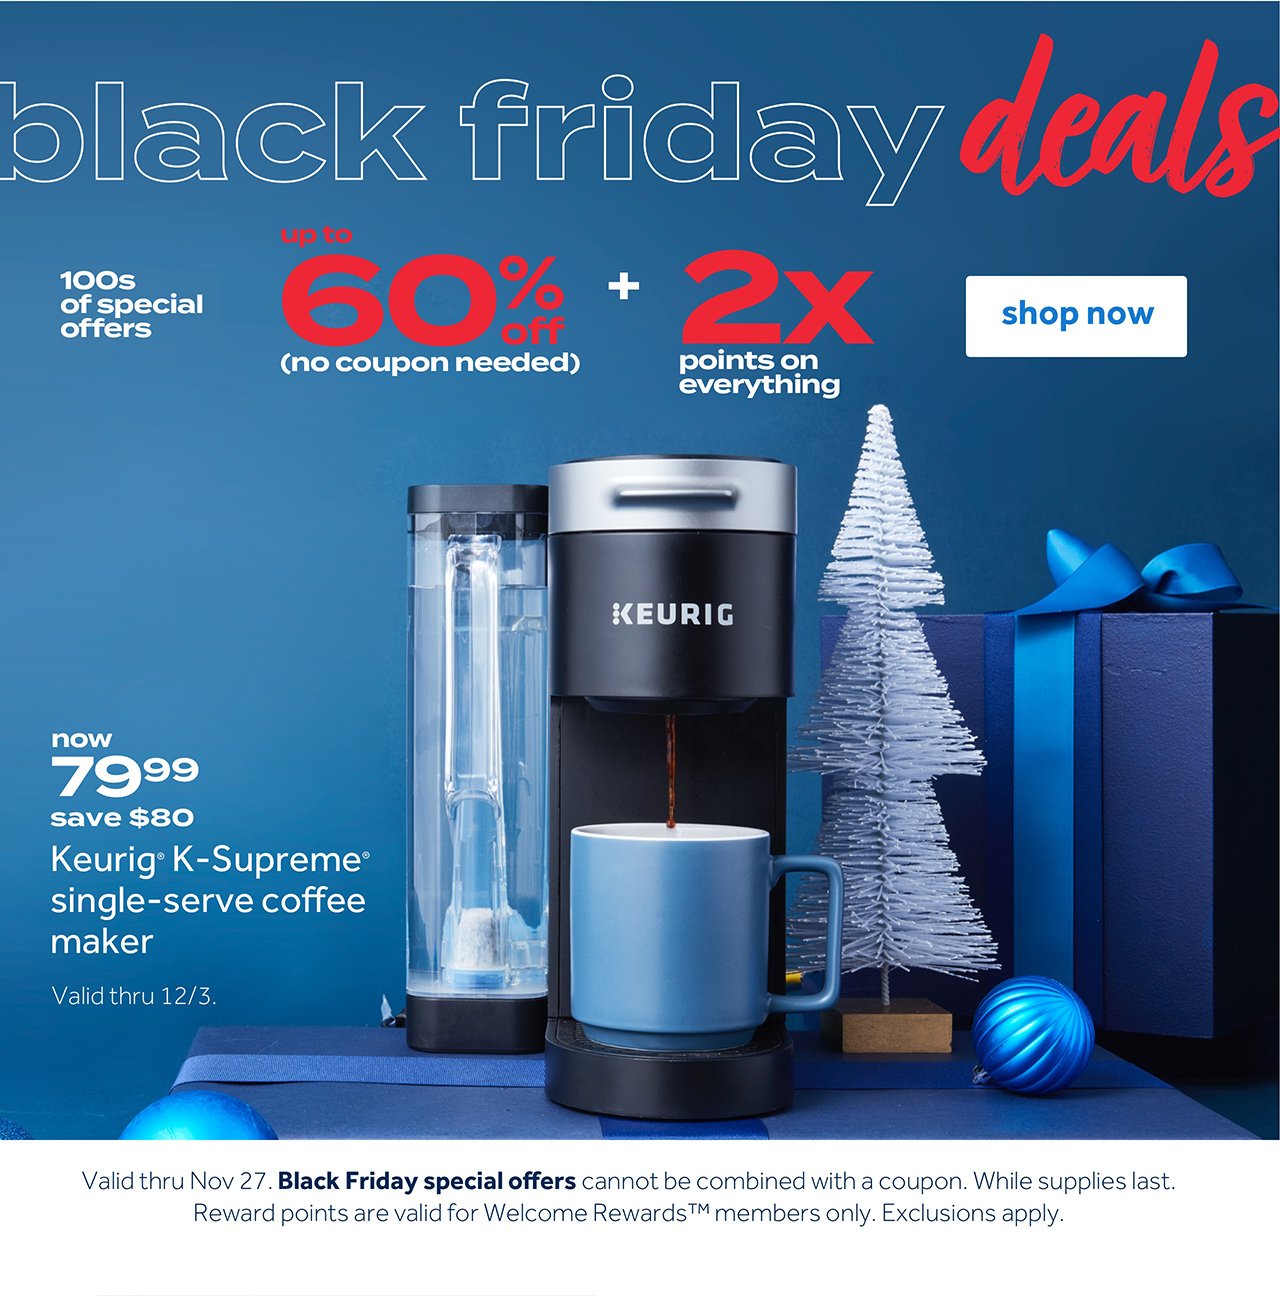 Black Friday Deals 100s of special offers up to 60% off (no coupon needed) + 2X points on everything Shop now now 79.99 save $80 Keurig K-Supreme single-serve coffee maker Valid thru 12/3 Valid thru No 27. Black Friday special offers cannot be combined with a coupon. While supplies last. Reward points are valid for Welcome Reward members only. Exclusions apply.